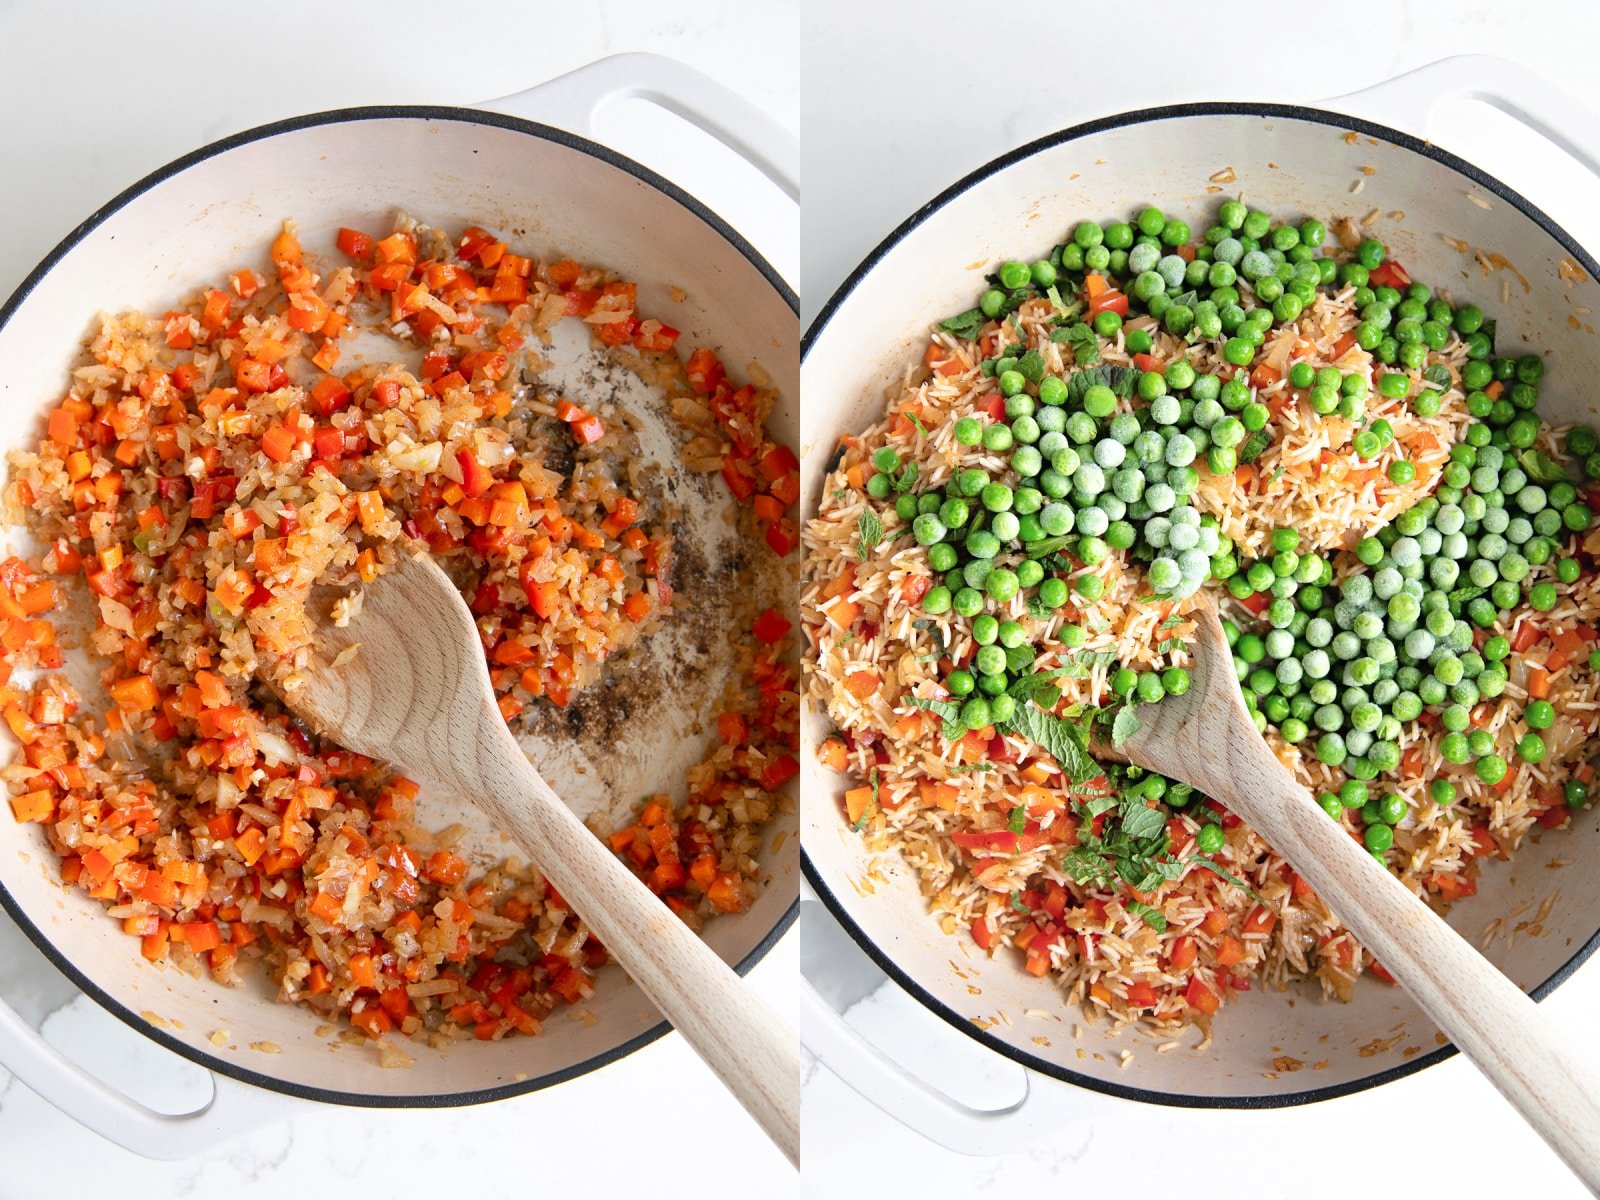 Collage of two images showing two of the steps required to make arroz con pollo - chicken and rice.